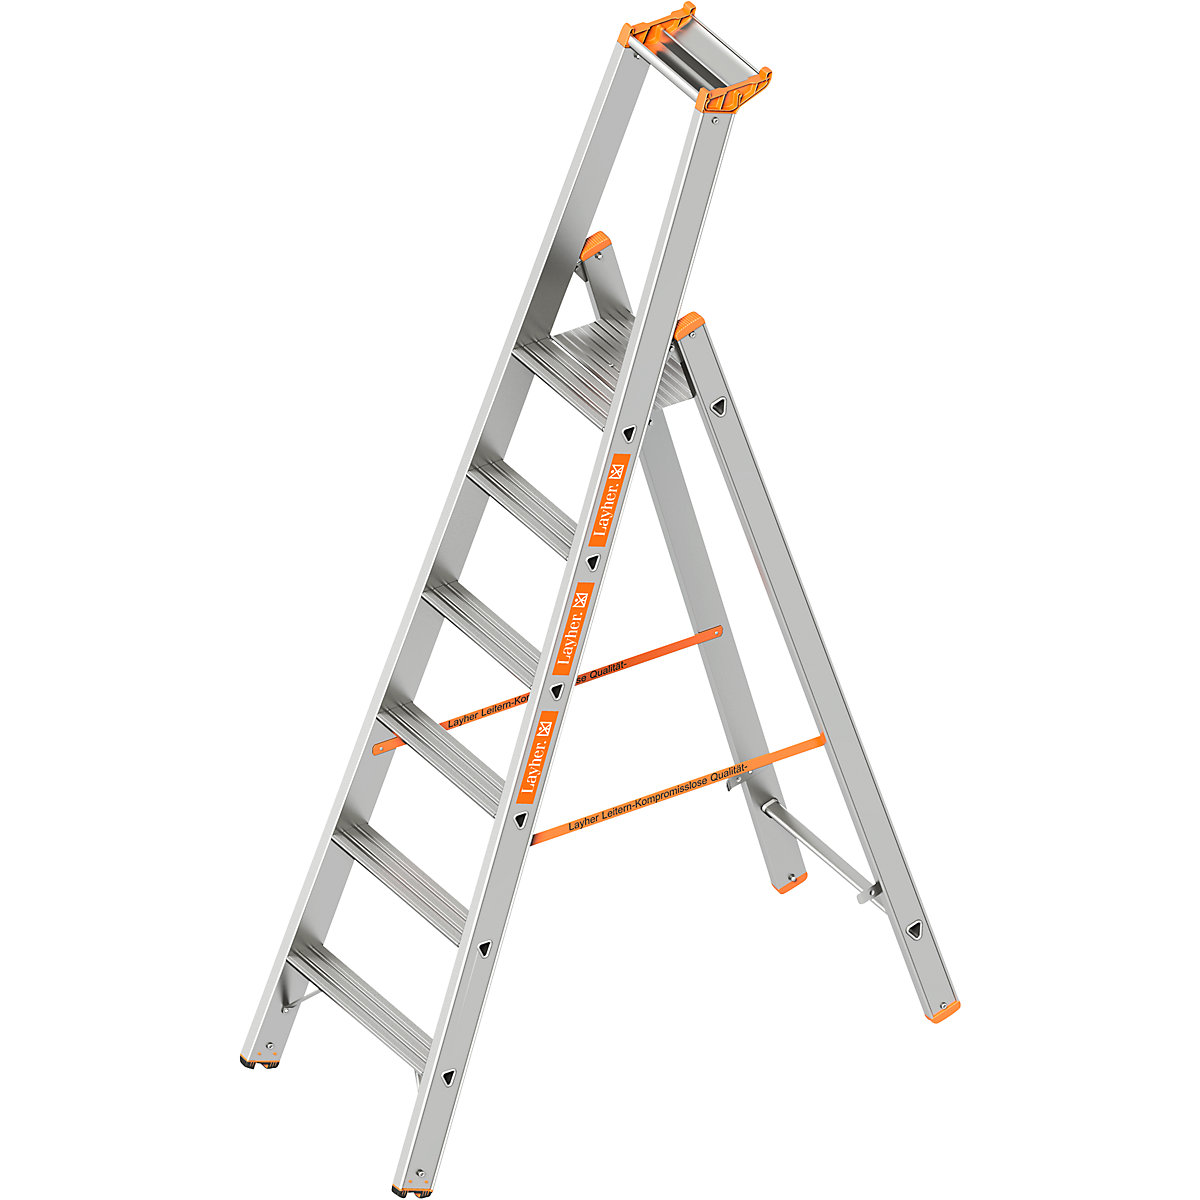 Step ladder – Layher, single sided access, 6 steps incl. platform-4